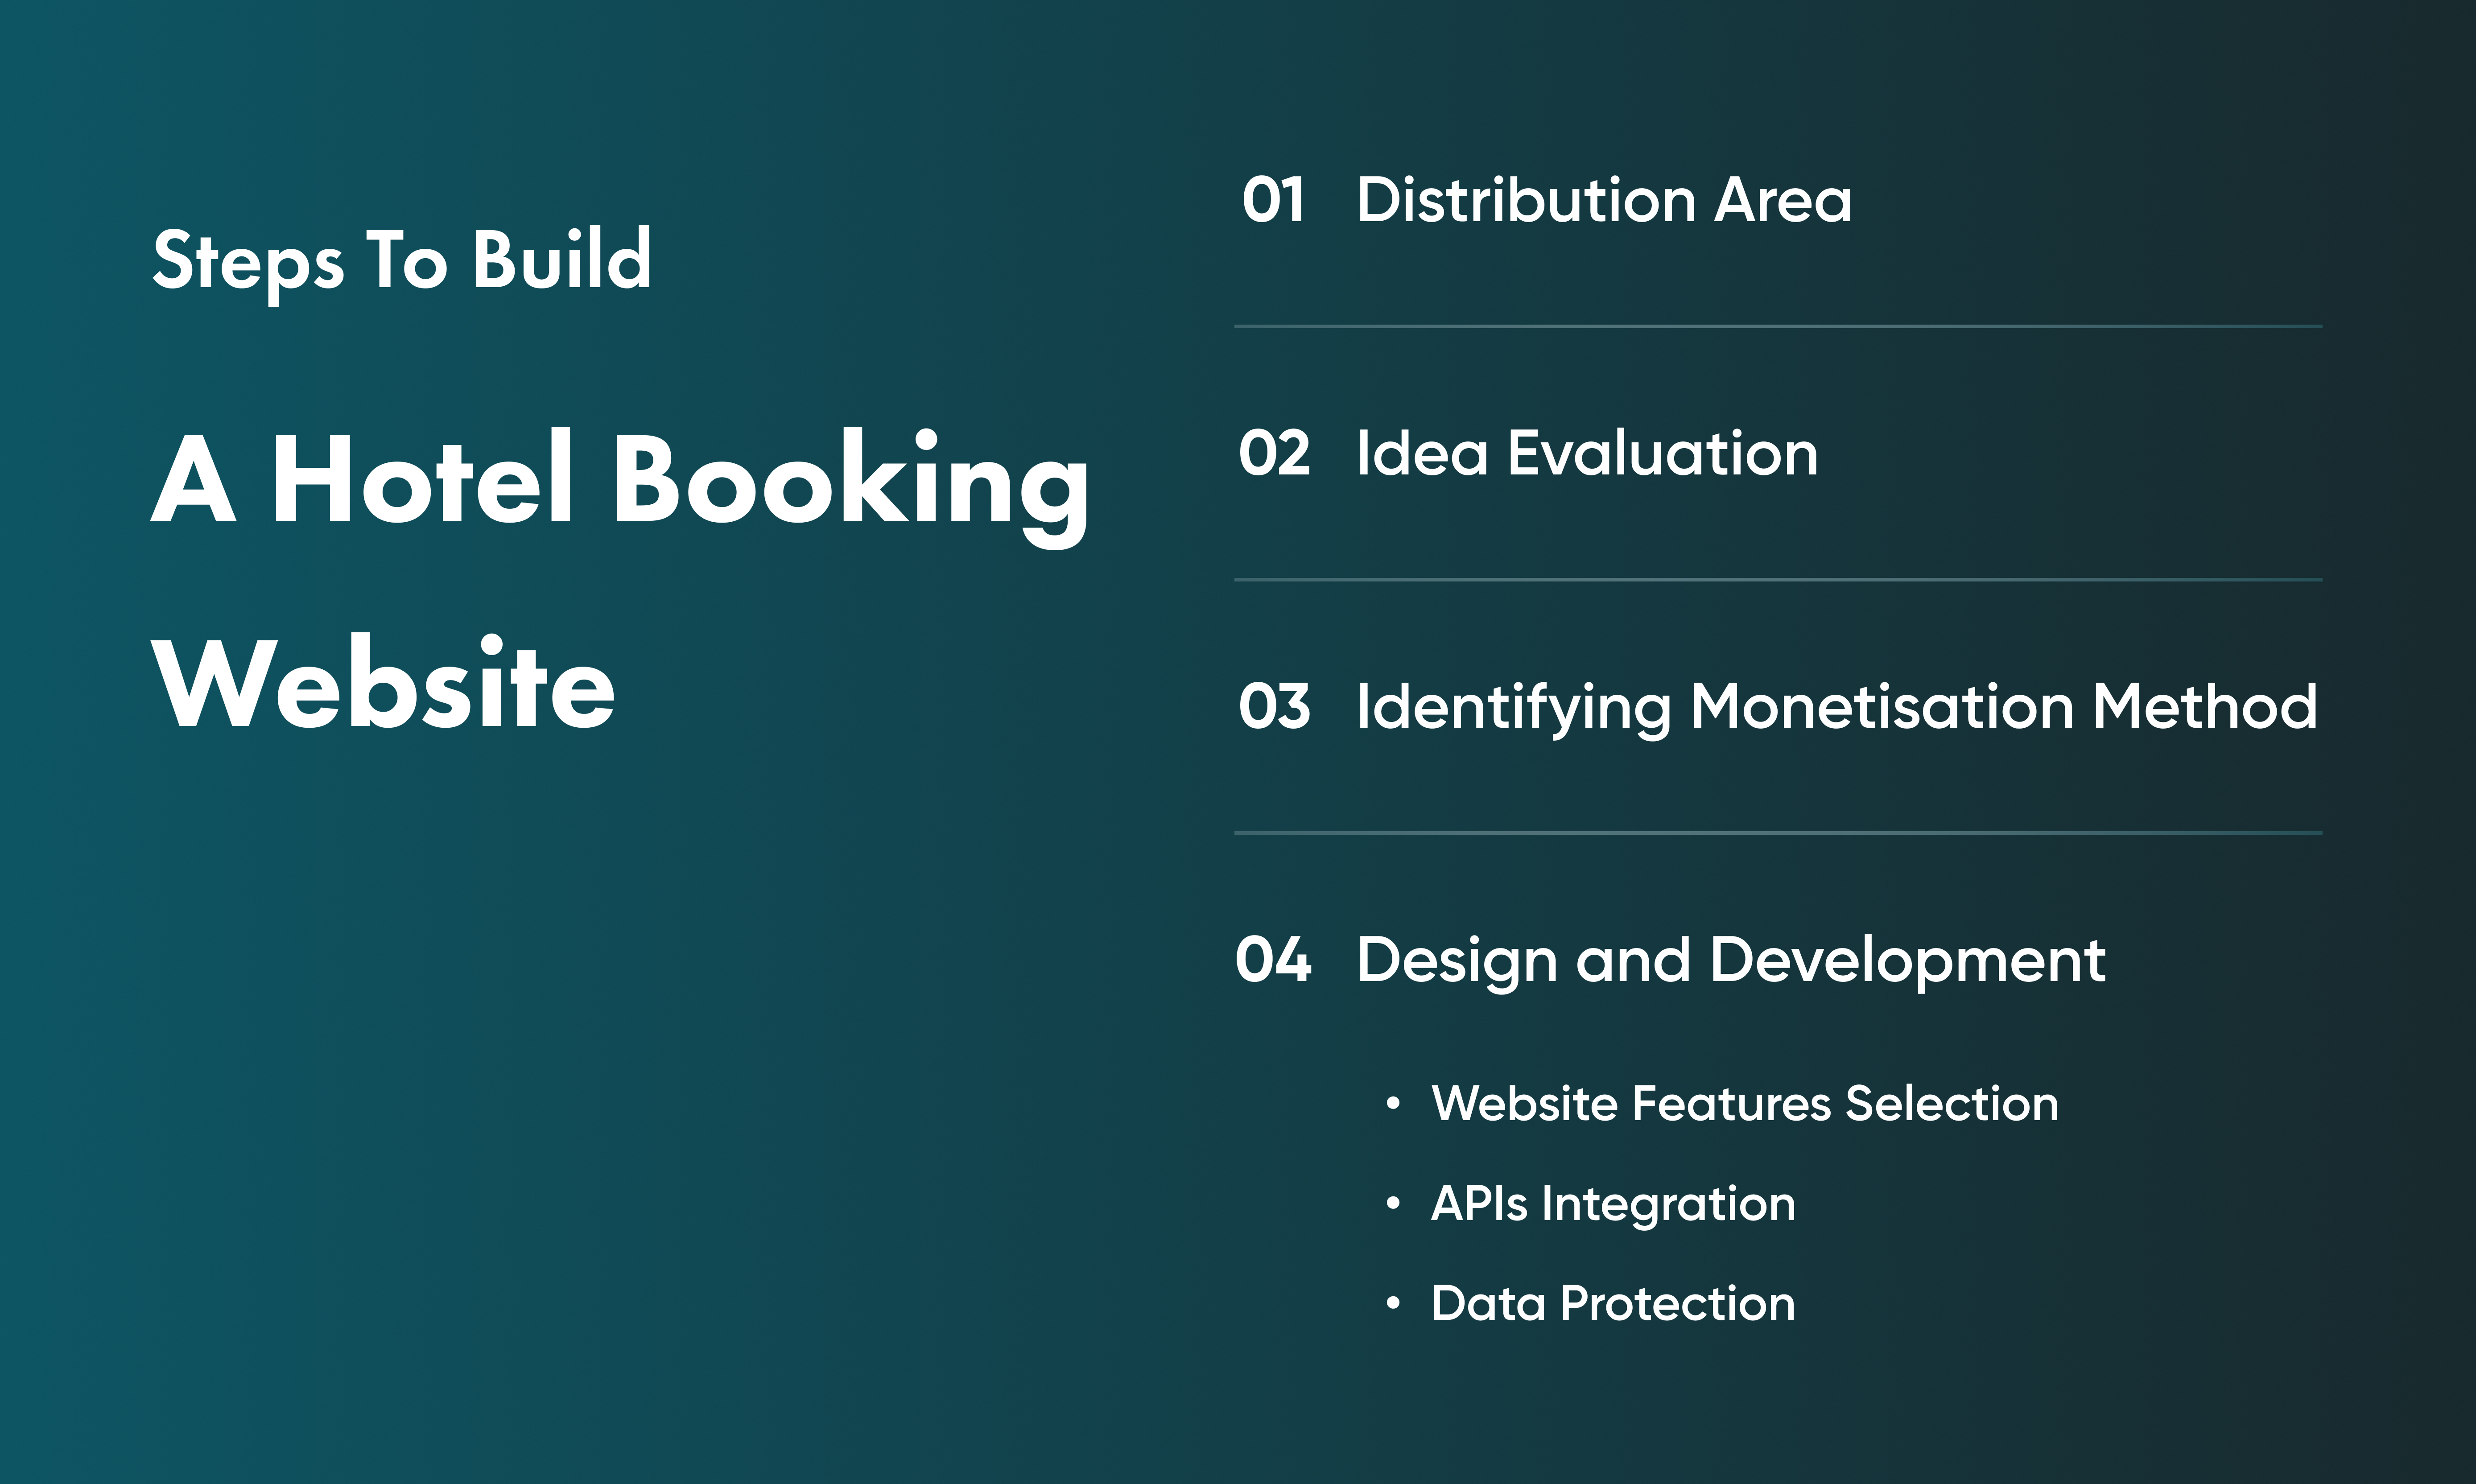 Discover the four main steps for building a hotel booking site.